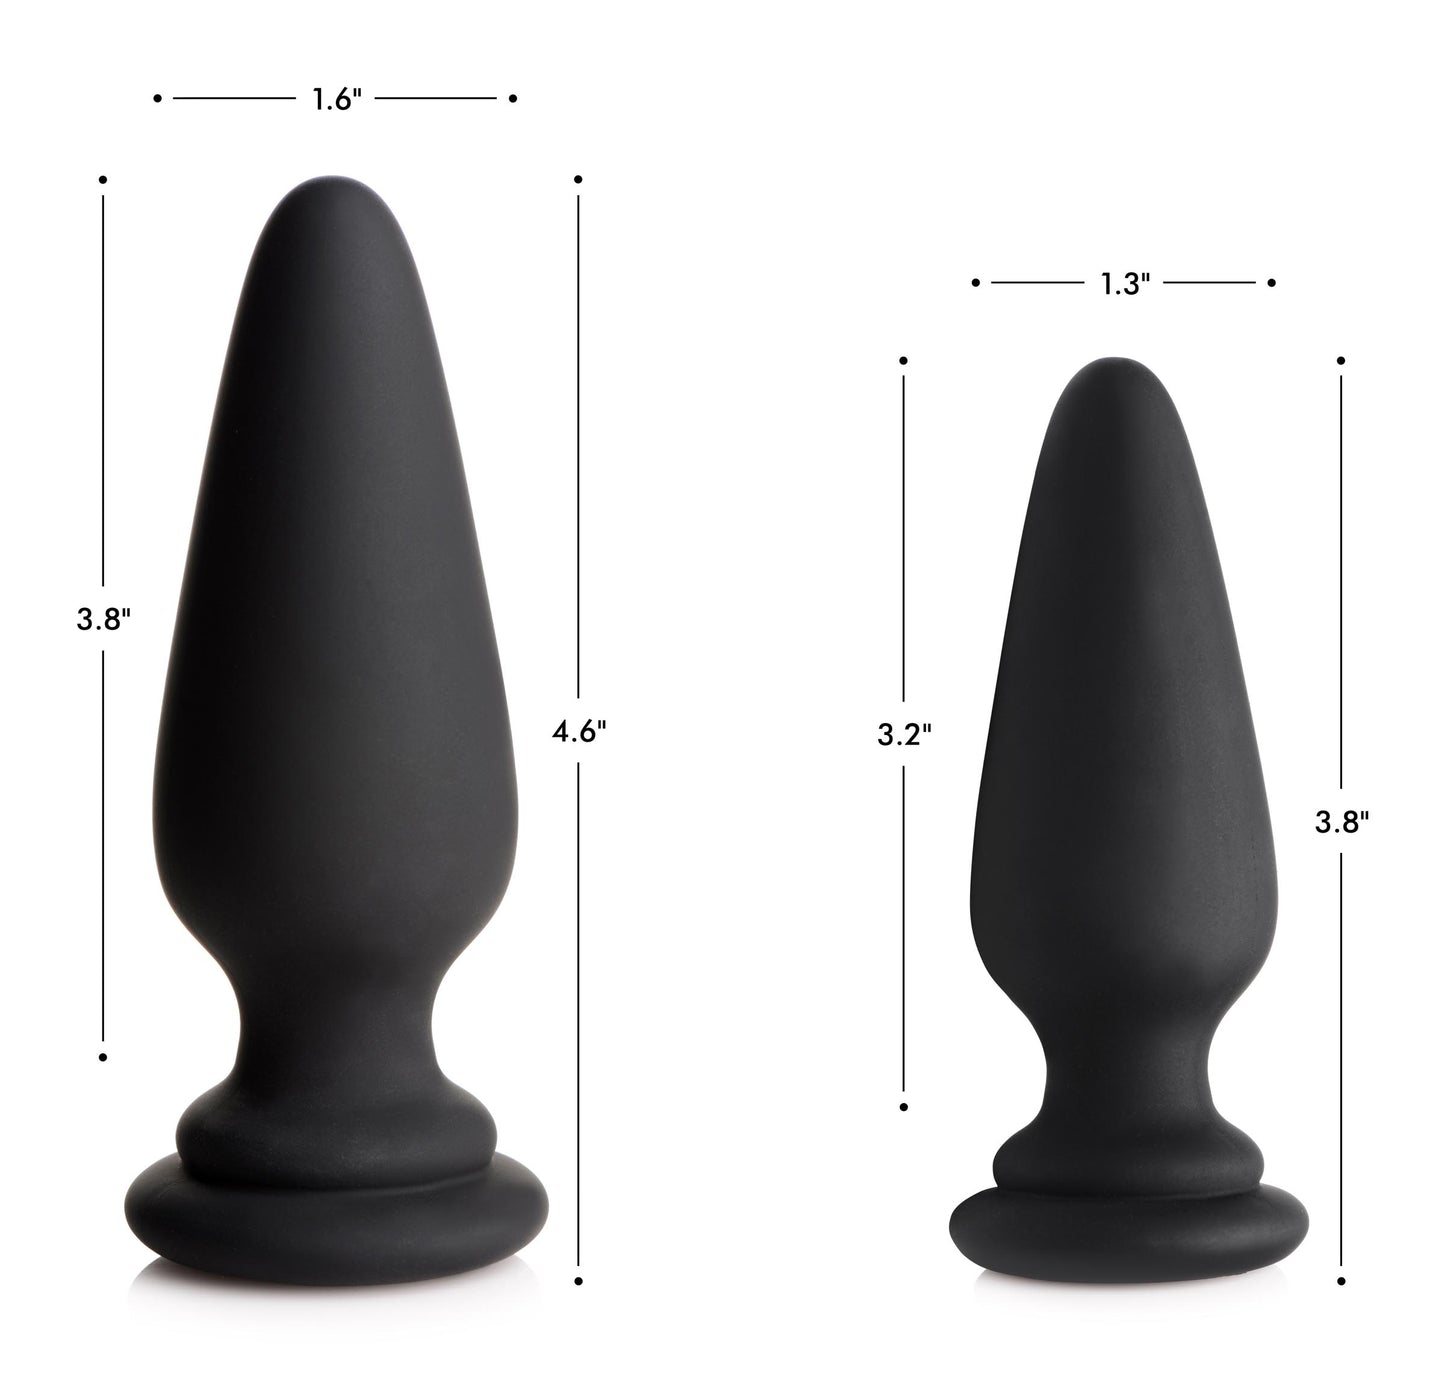 Large Anal Plug With Interchangeable Bunny Tail - White